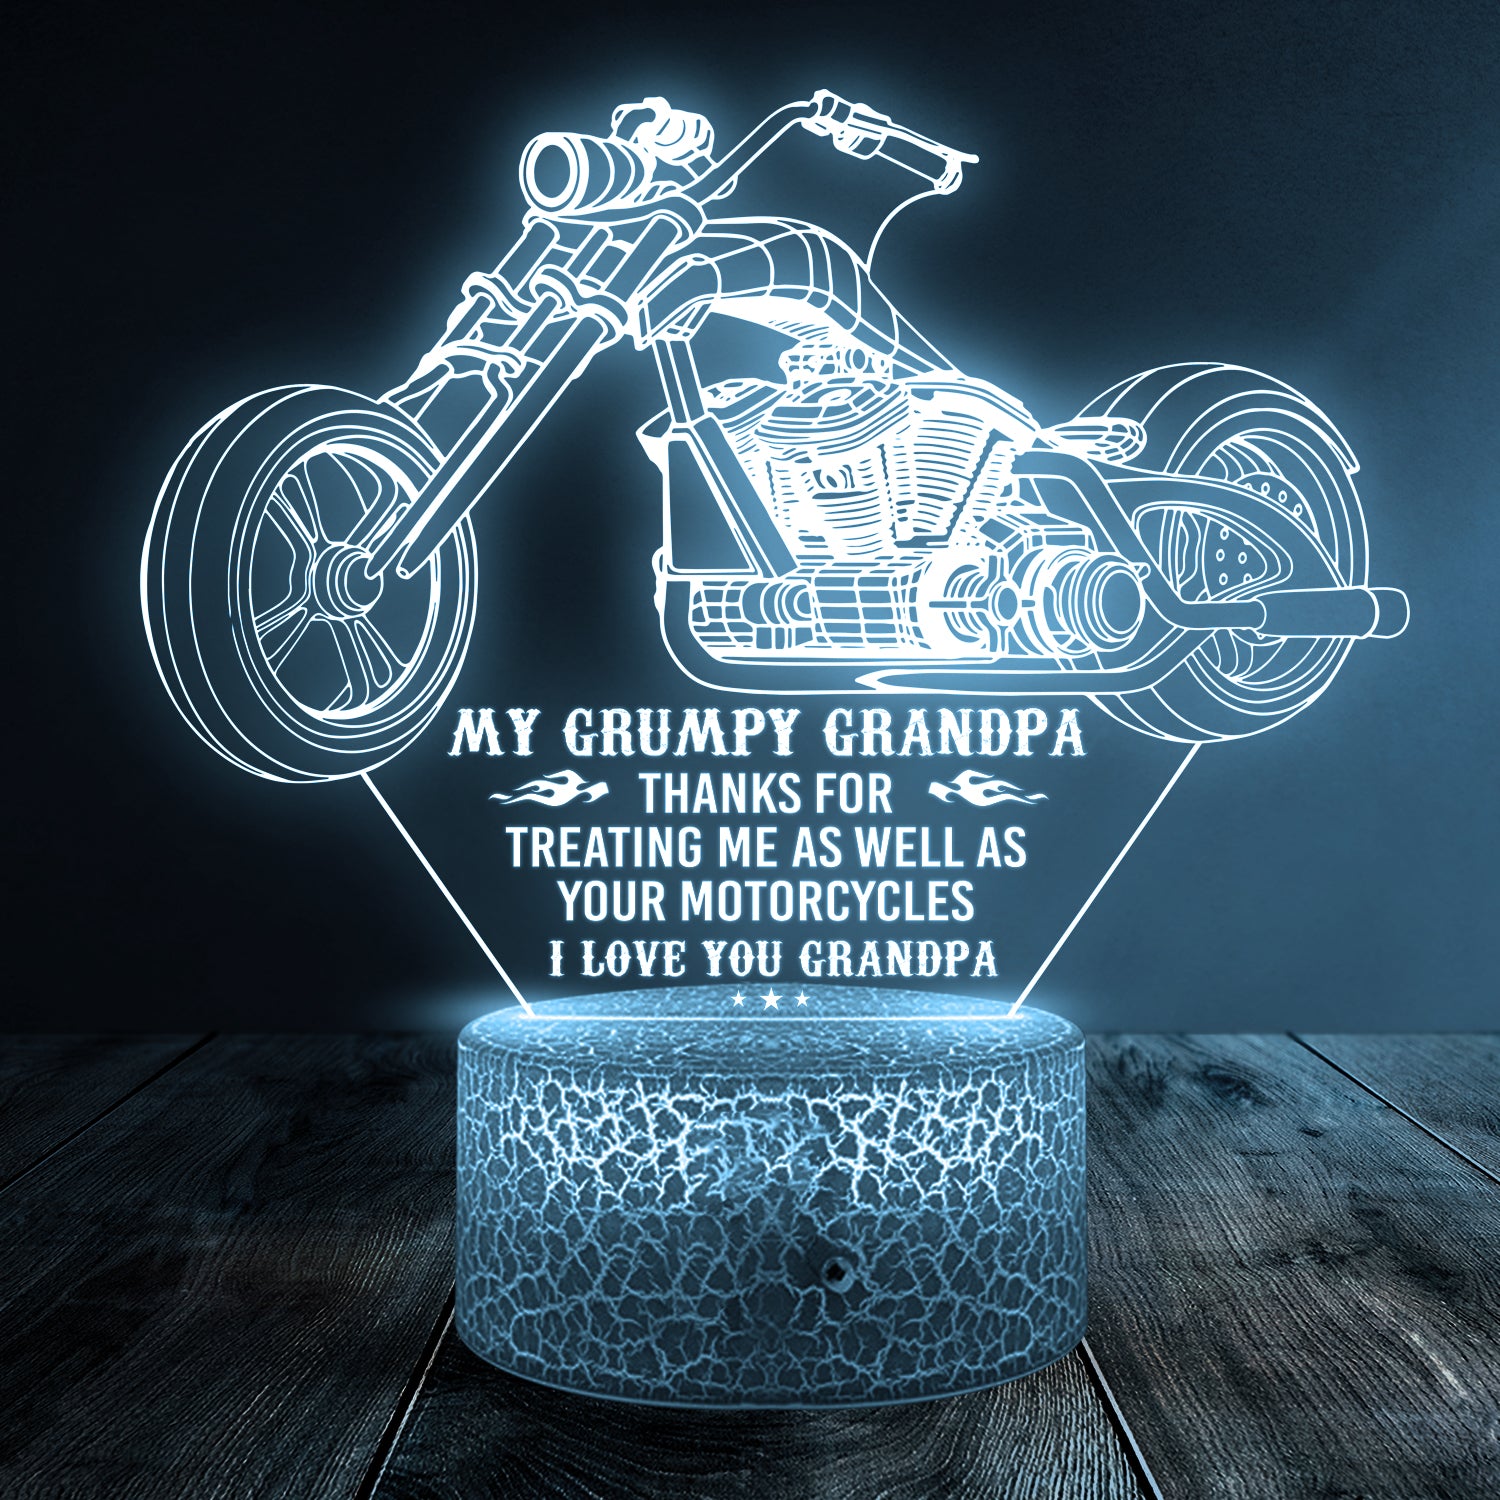 3D Led Light - Biker - My Grumpy Grandpa - Thanks For Treating Me As Well As Your Motorcycles - Ukglca20001